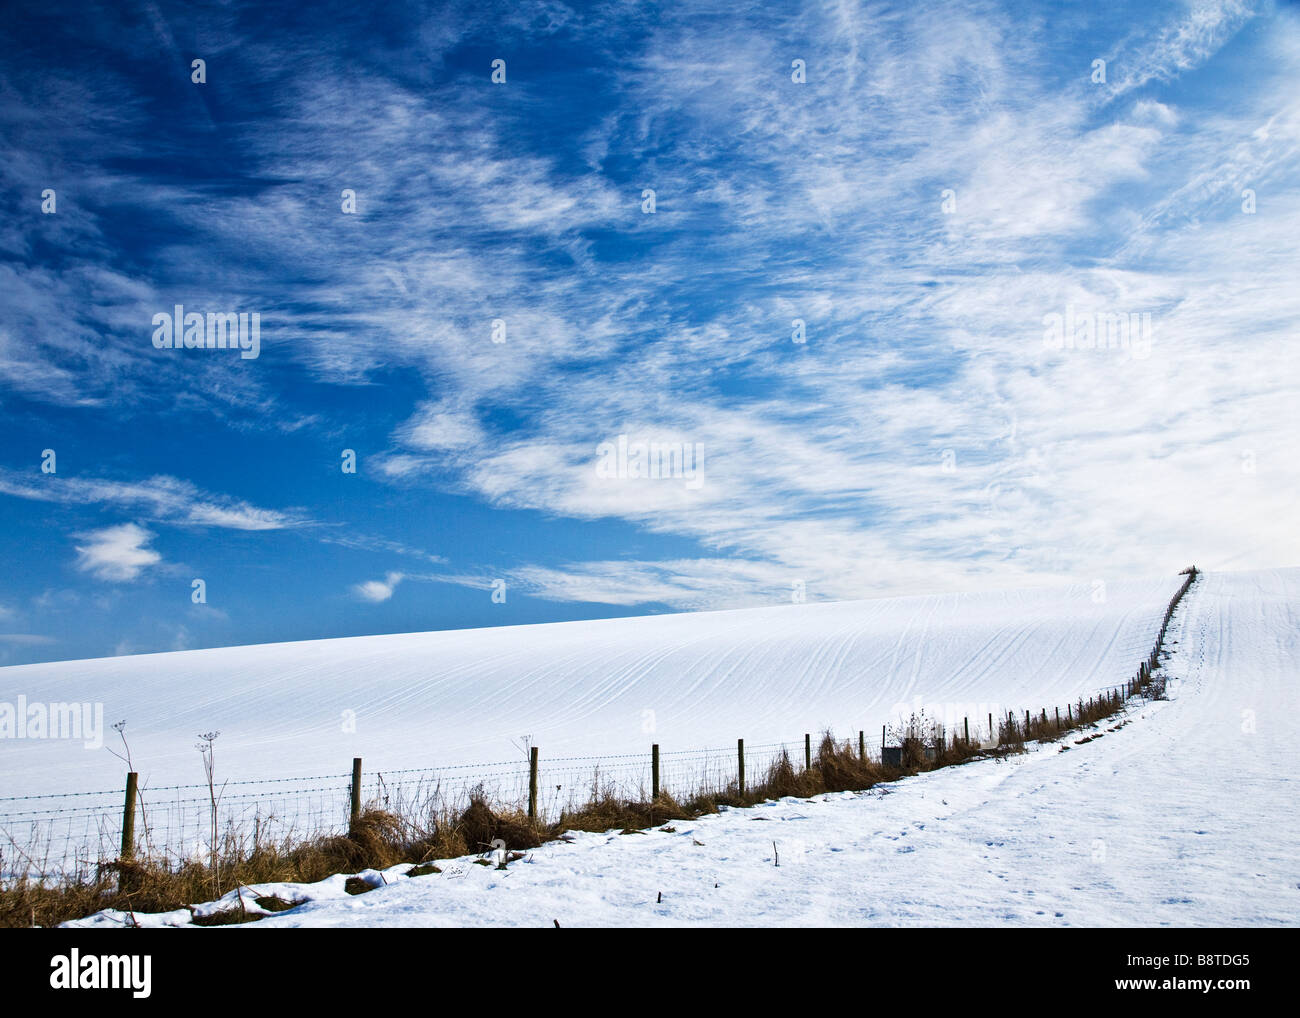 A sunny snowy winter landscape view or scene showing a snow covered field and cirrus cloud formation in a blue sky Stock Photo